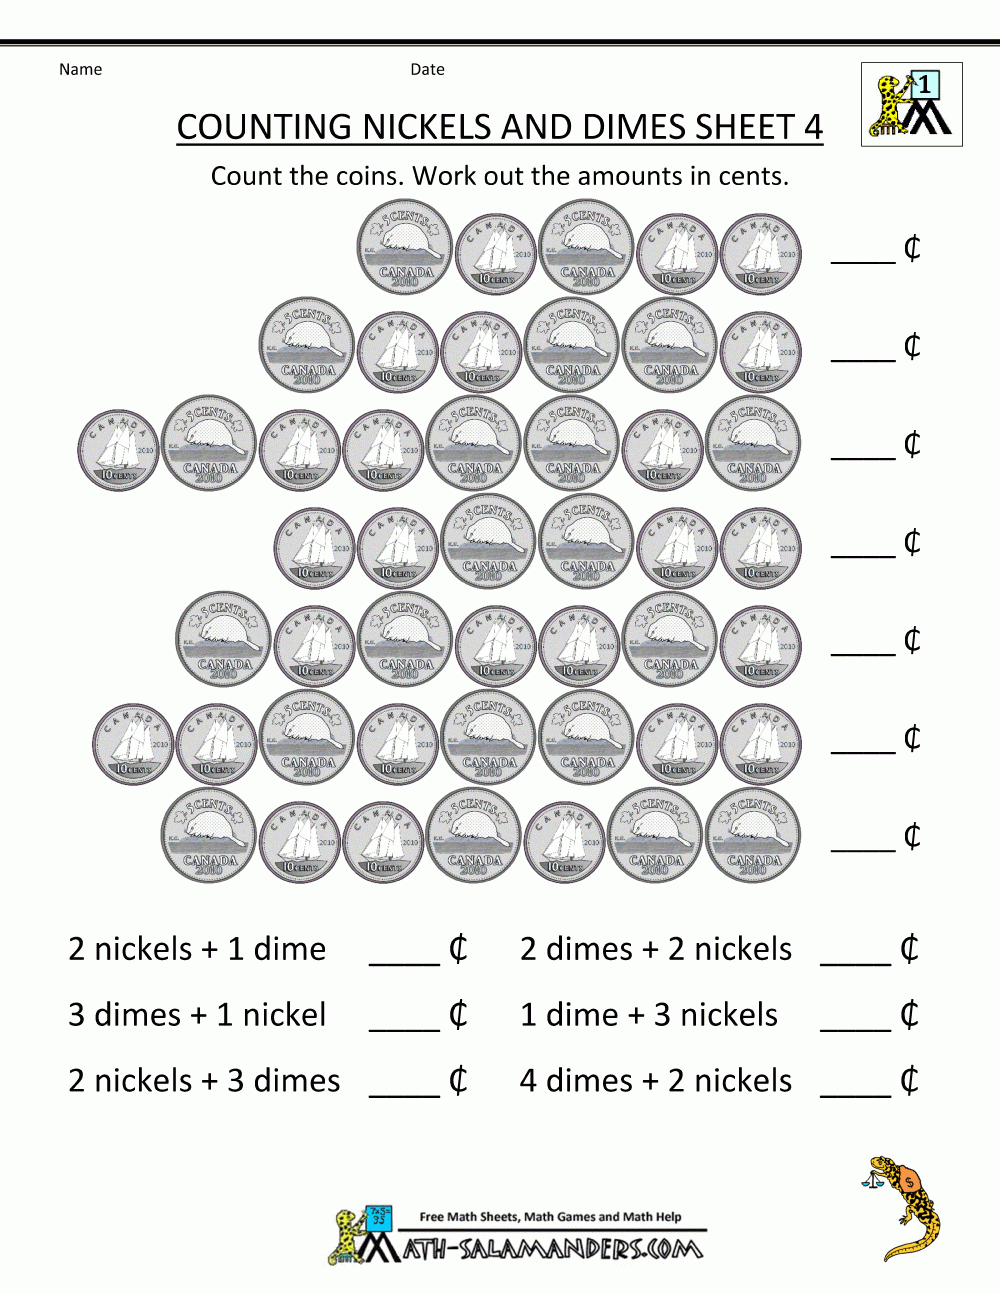 Printable Canadian Money Worksheets Counting Nickels And Dimes 4 - Free Printable Money Worksheets Australia